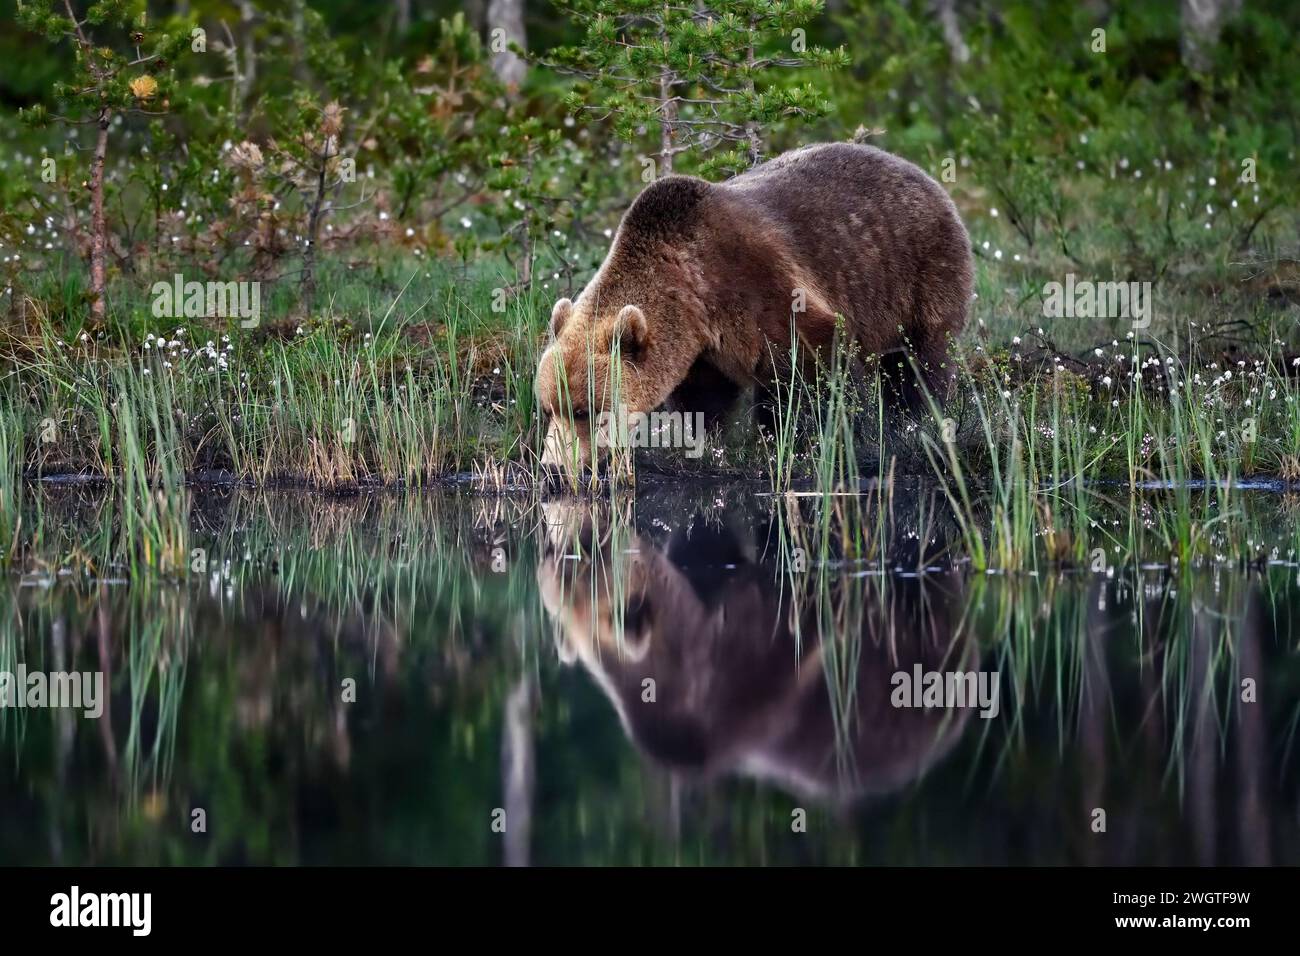 A bear quenching its thirst Stock Photo